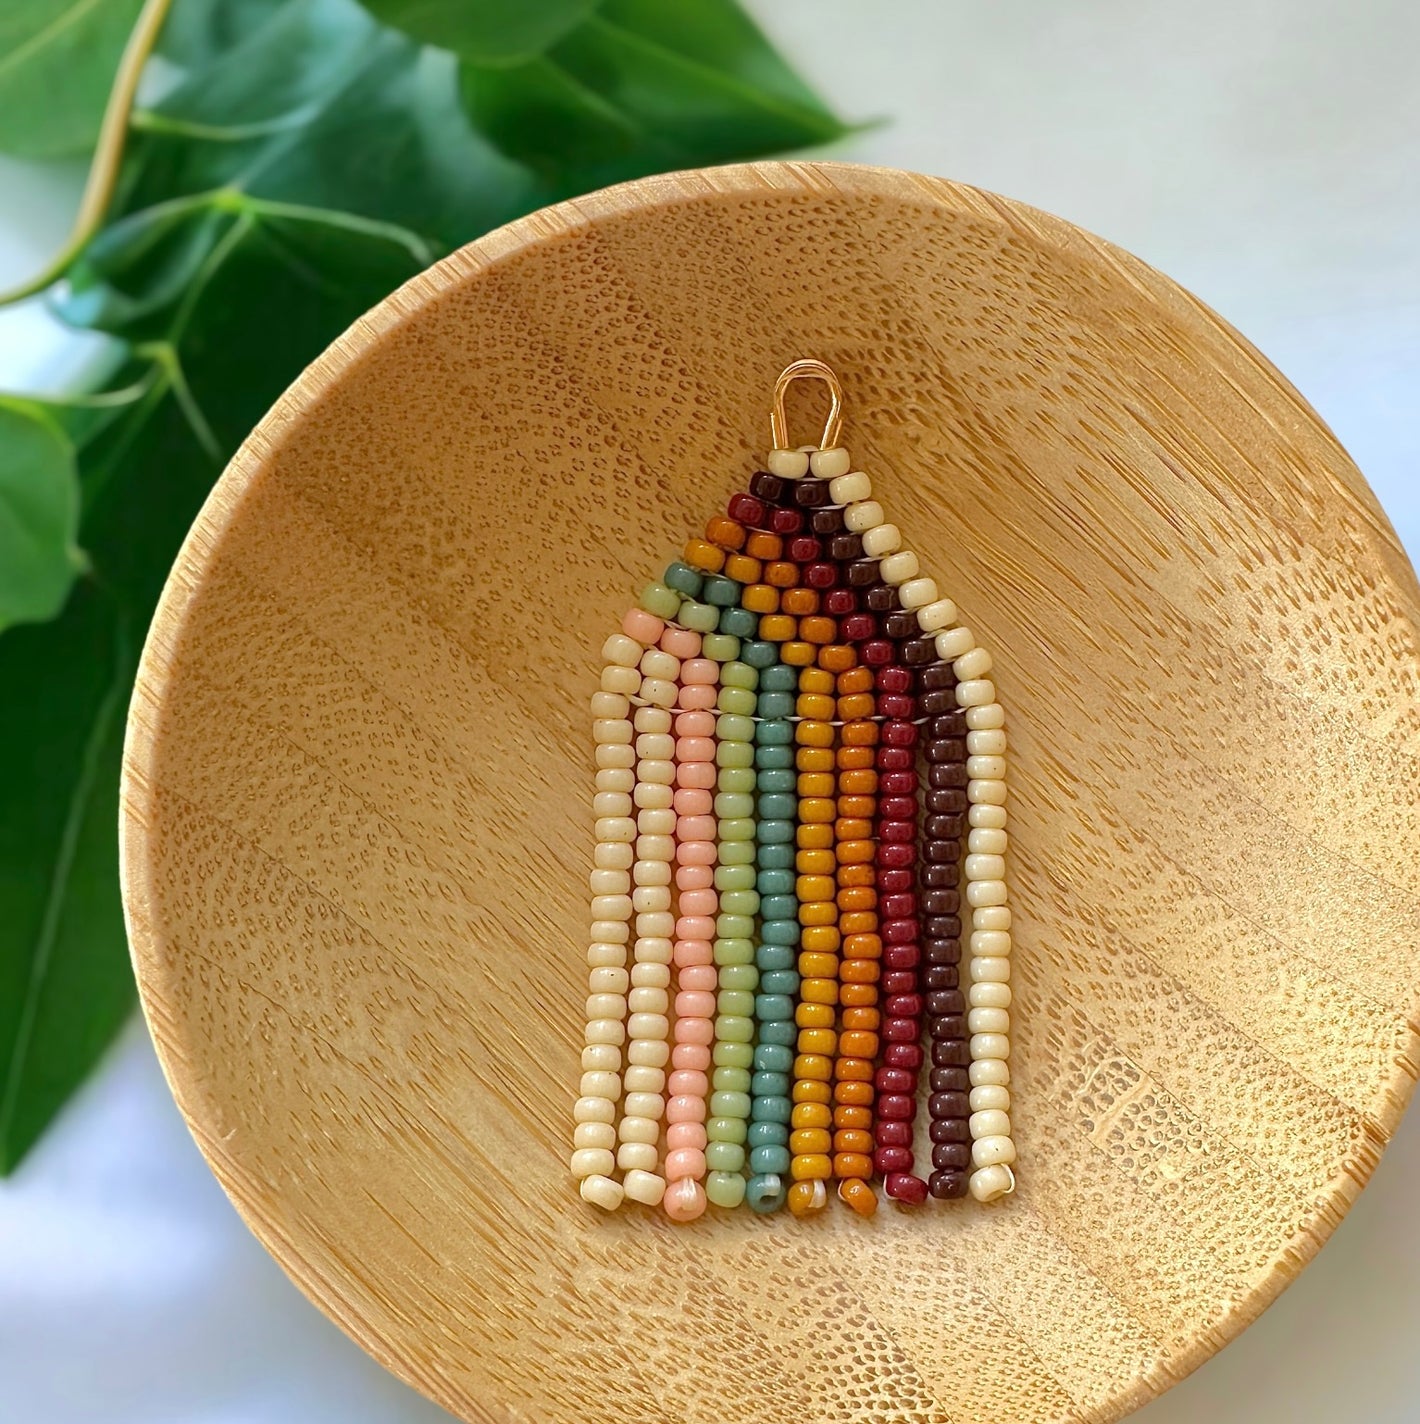 Mini boho rainbow beaded fringe earrings in a wooden bowl on a white cloth surrounded by green leaves